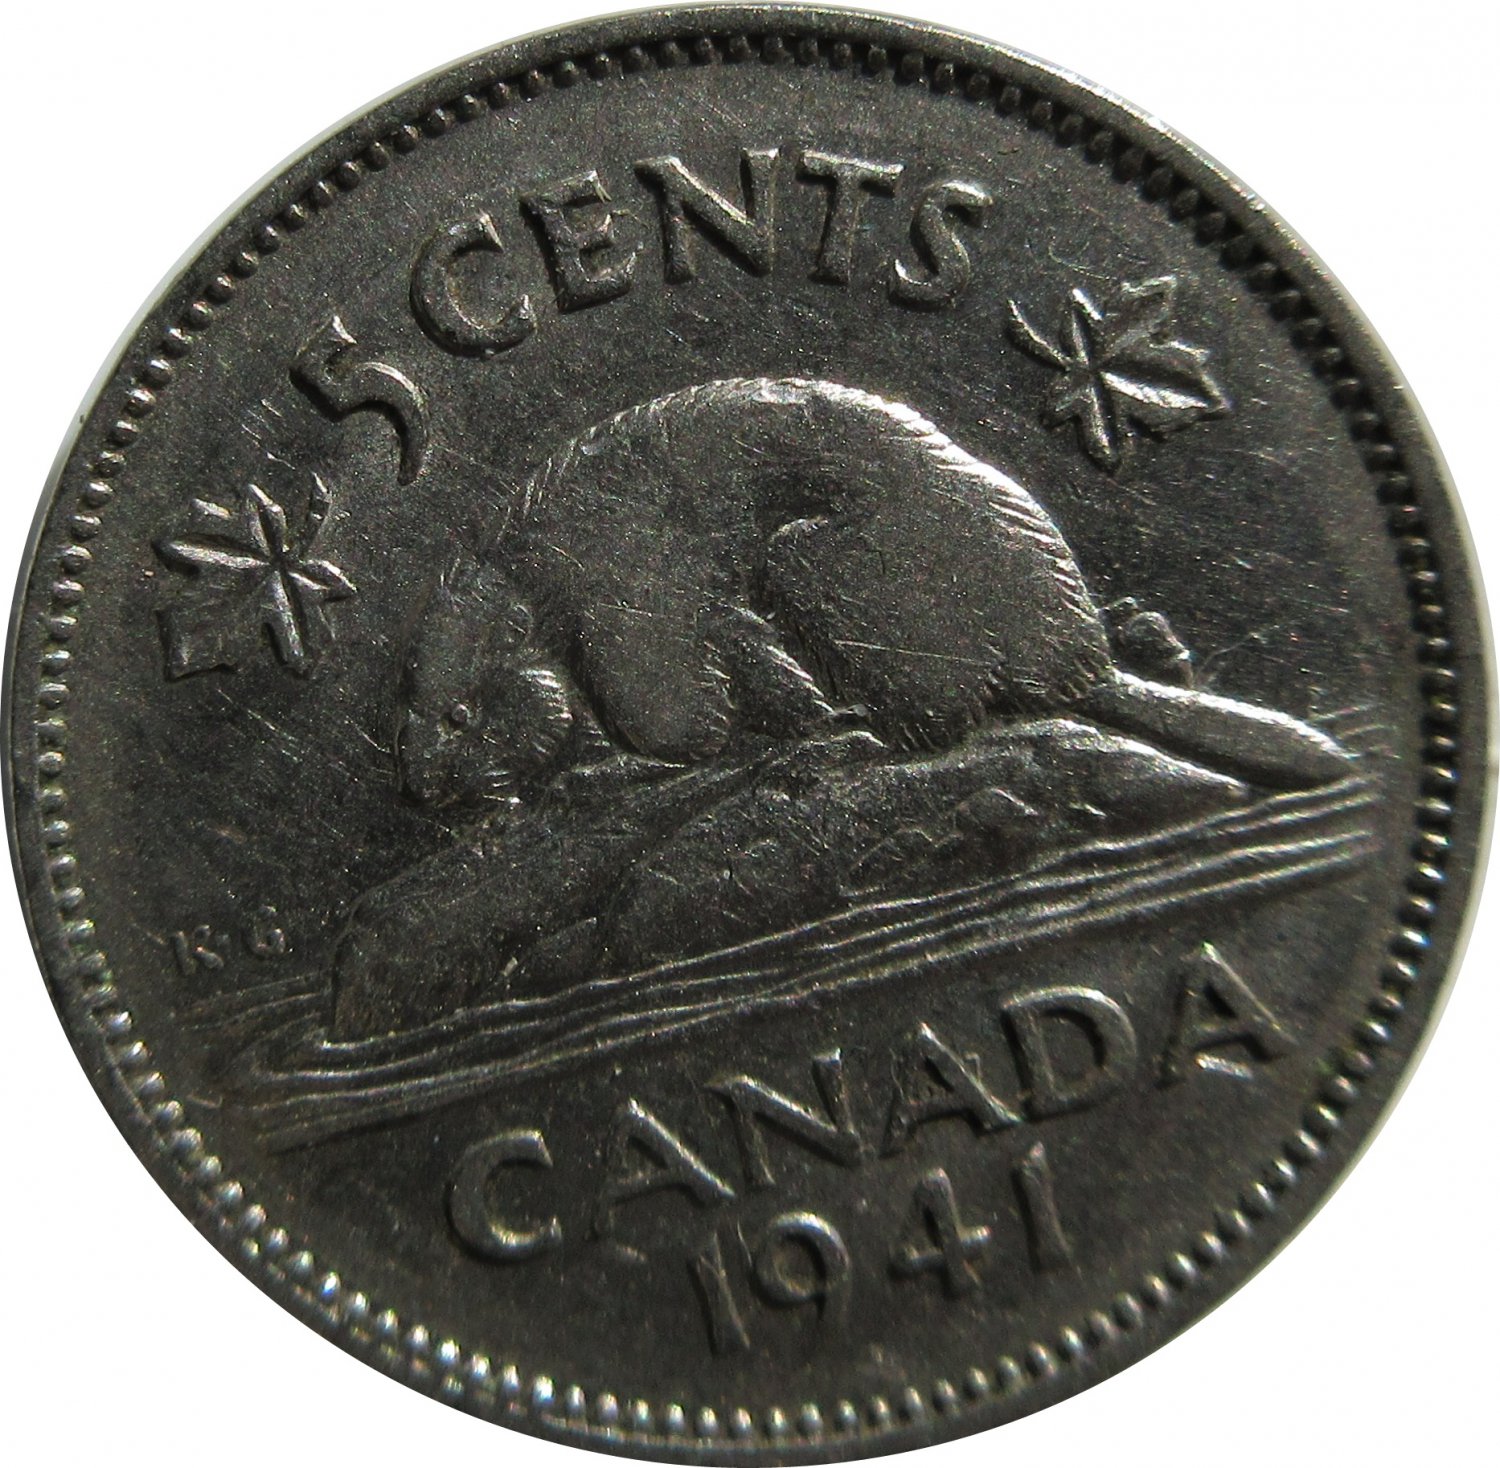 1941 Canadian 5 Cent